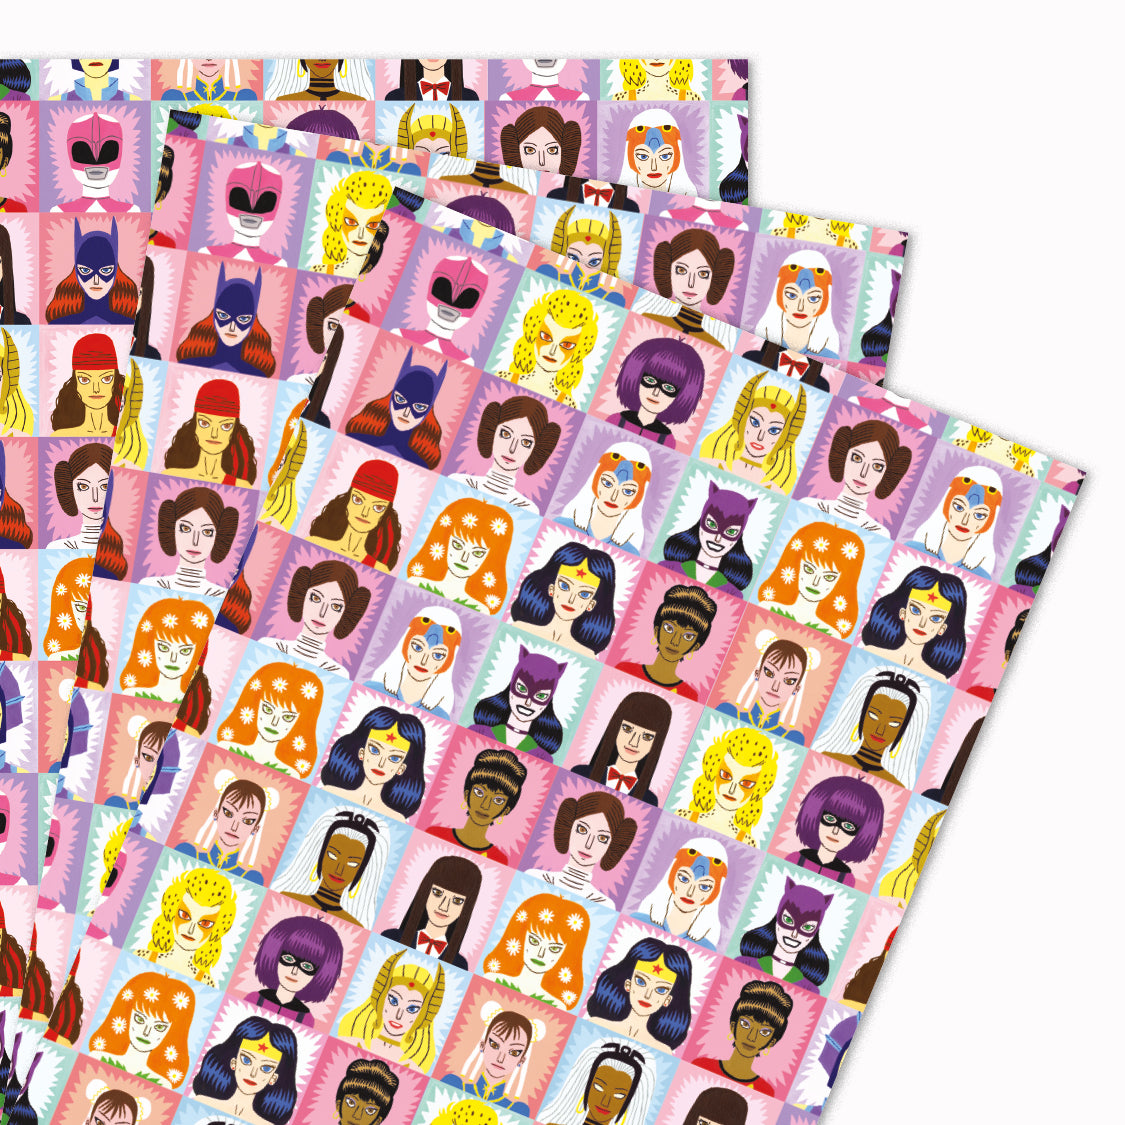 Pack of 3 &#39;Heroines and Villains&#39; gift wrap sheets illustrated by&amp;nbsp;Jack Teagle for USTUDIO Design. This design features an illustrative interpretation of some of the best loved and most iconic heroines and villains. A cult classic design loved by kids both big and small.